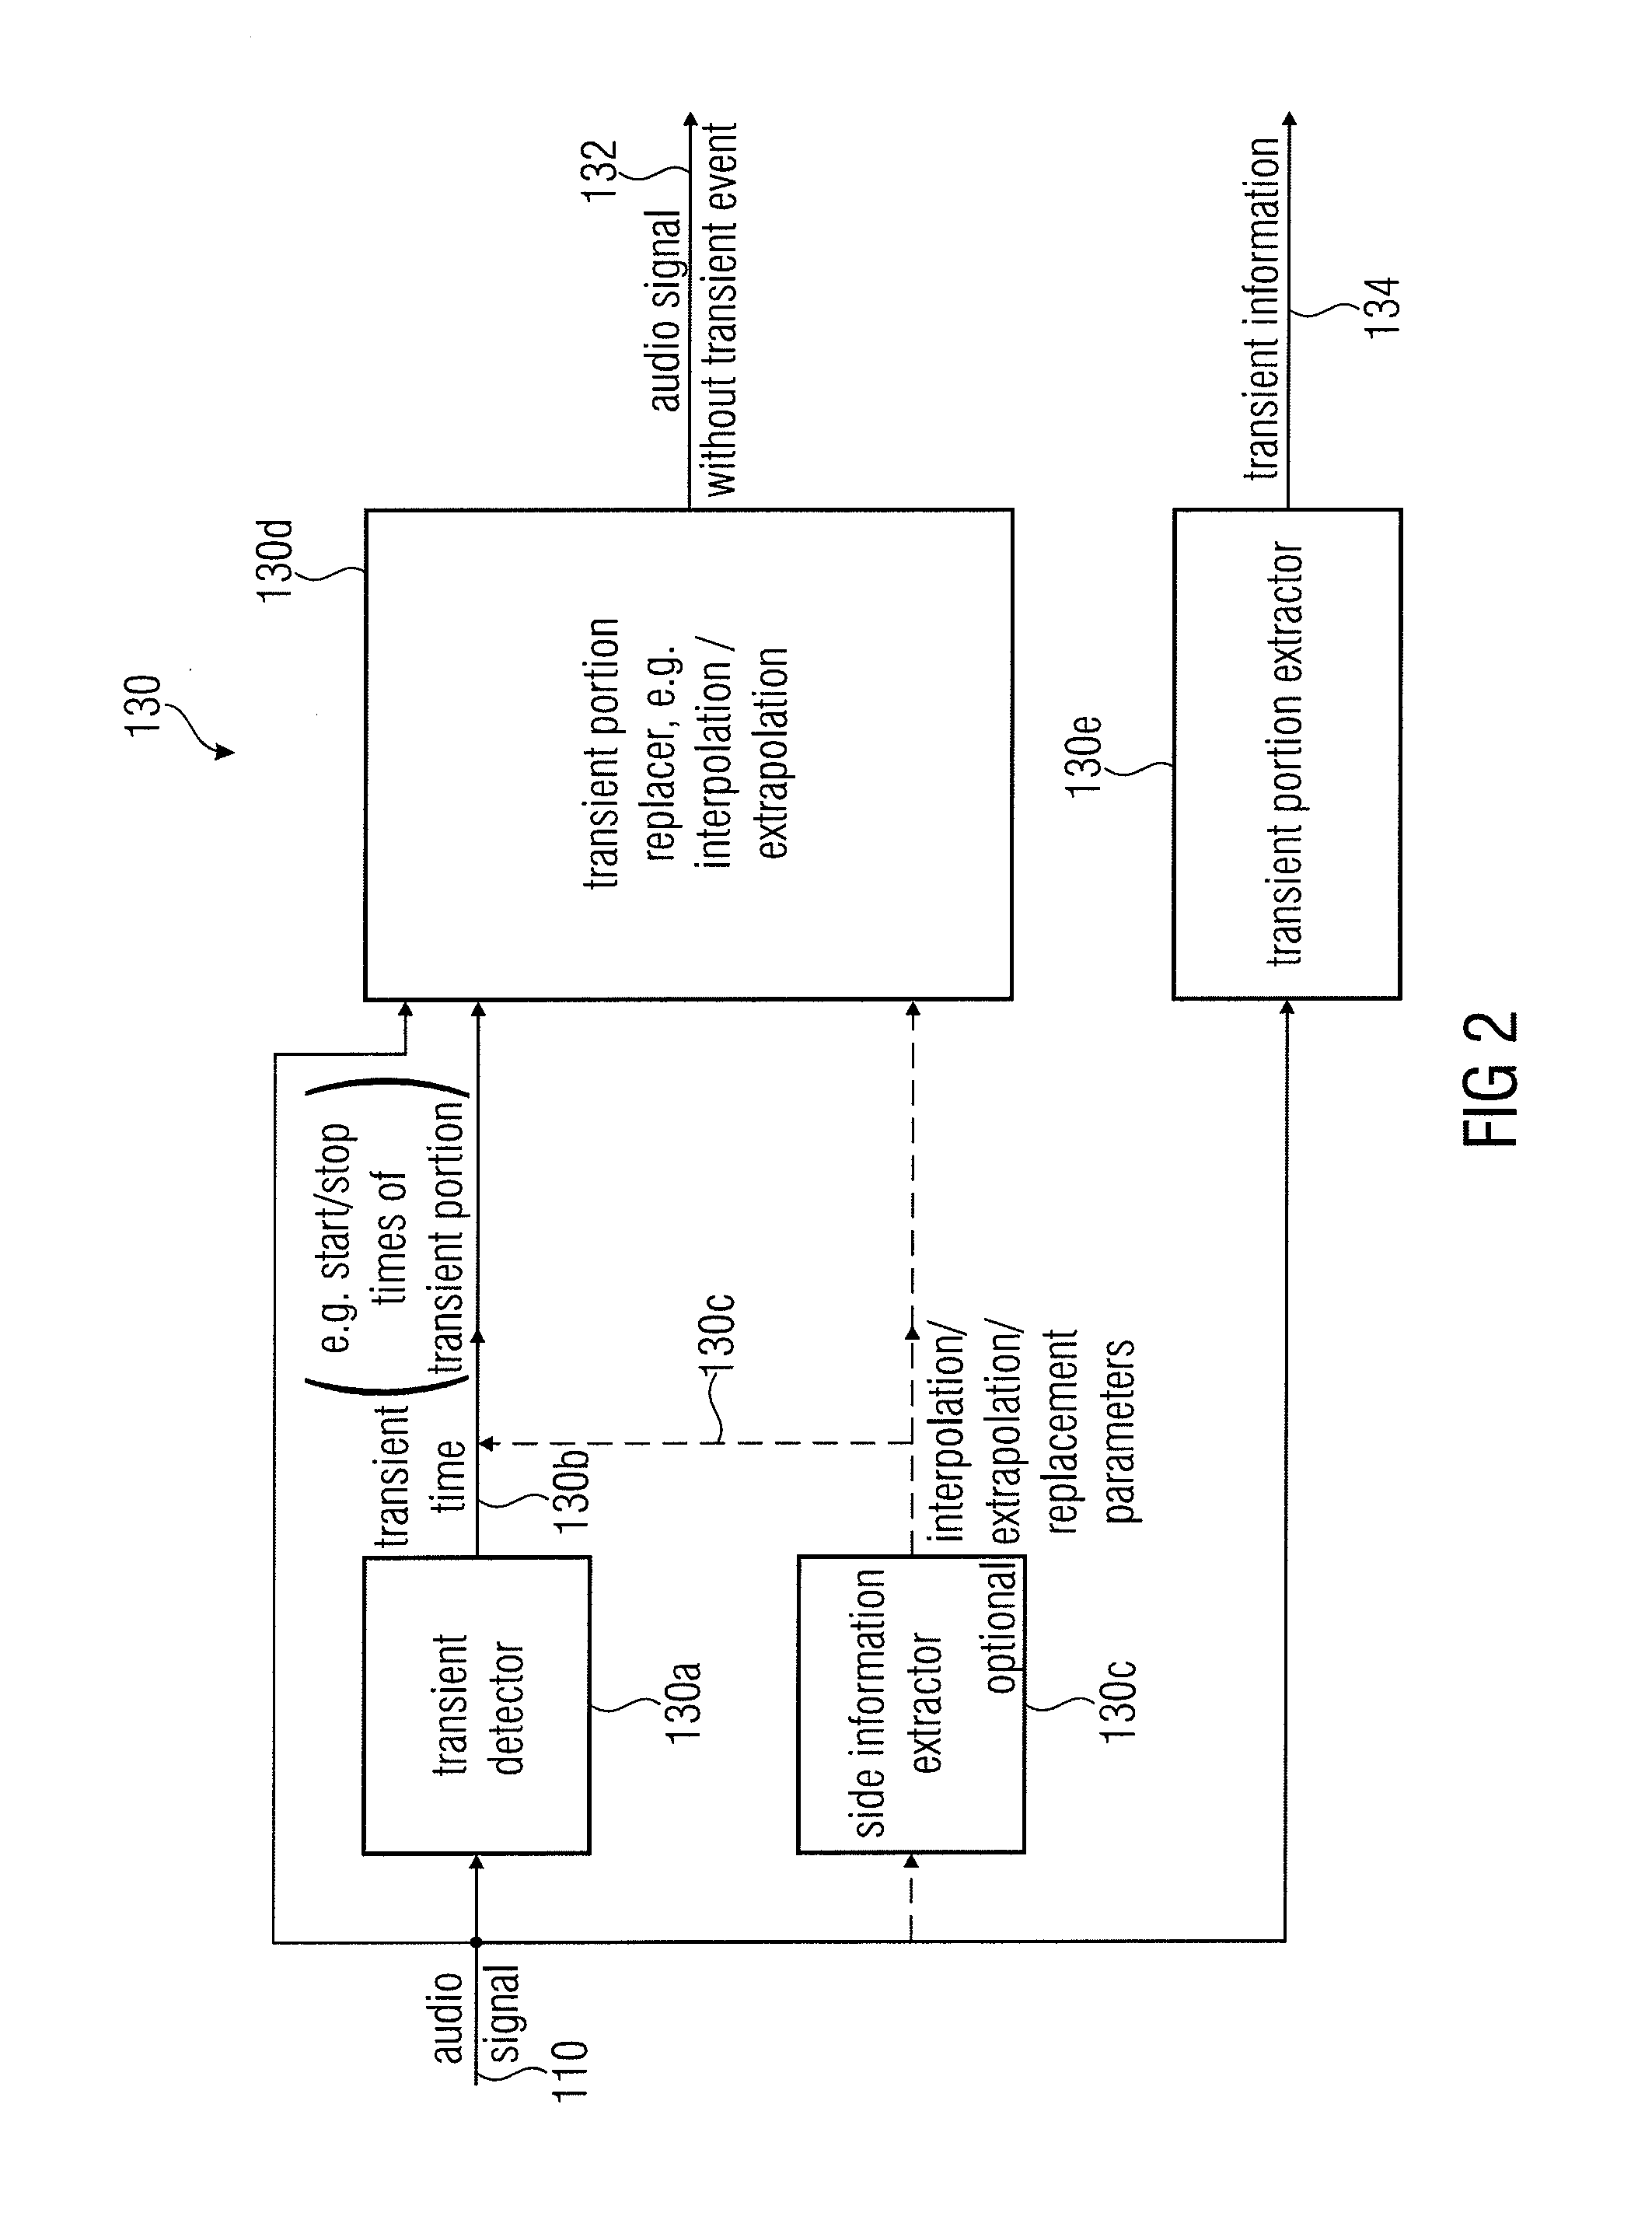 Apparatus, method and computer program for manipulating an audio signal comprising a transient event